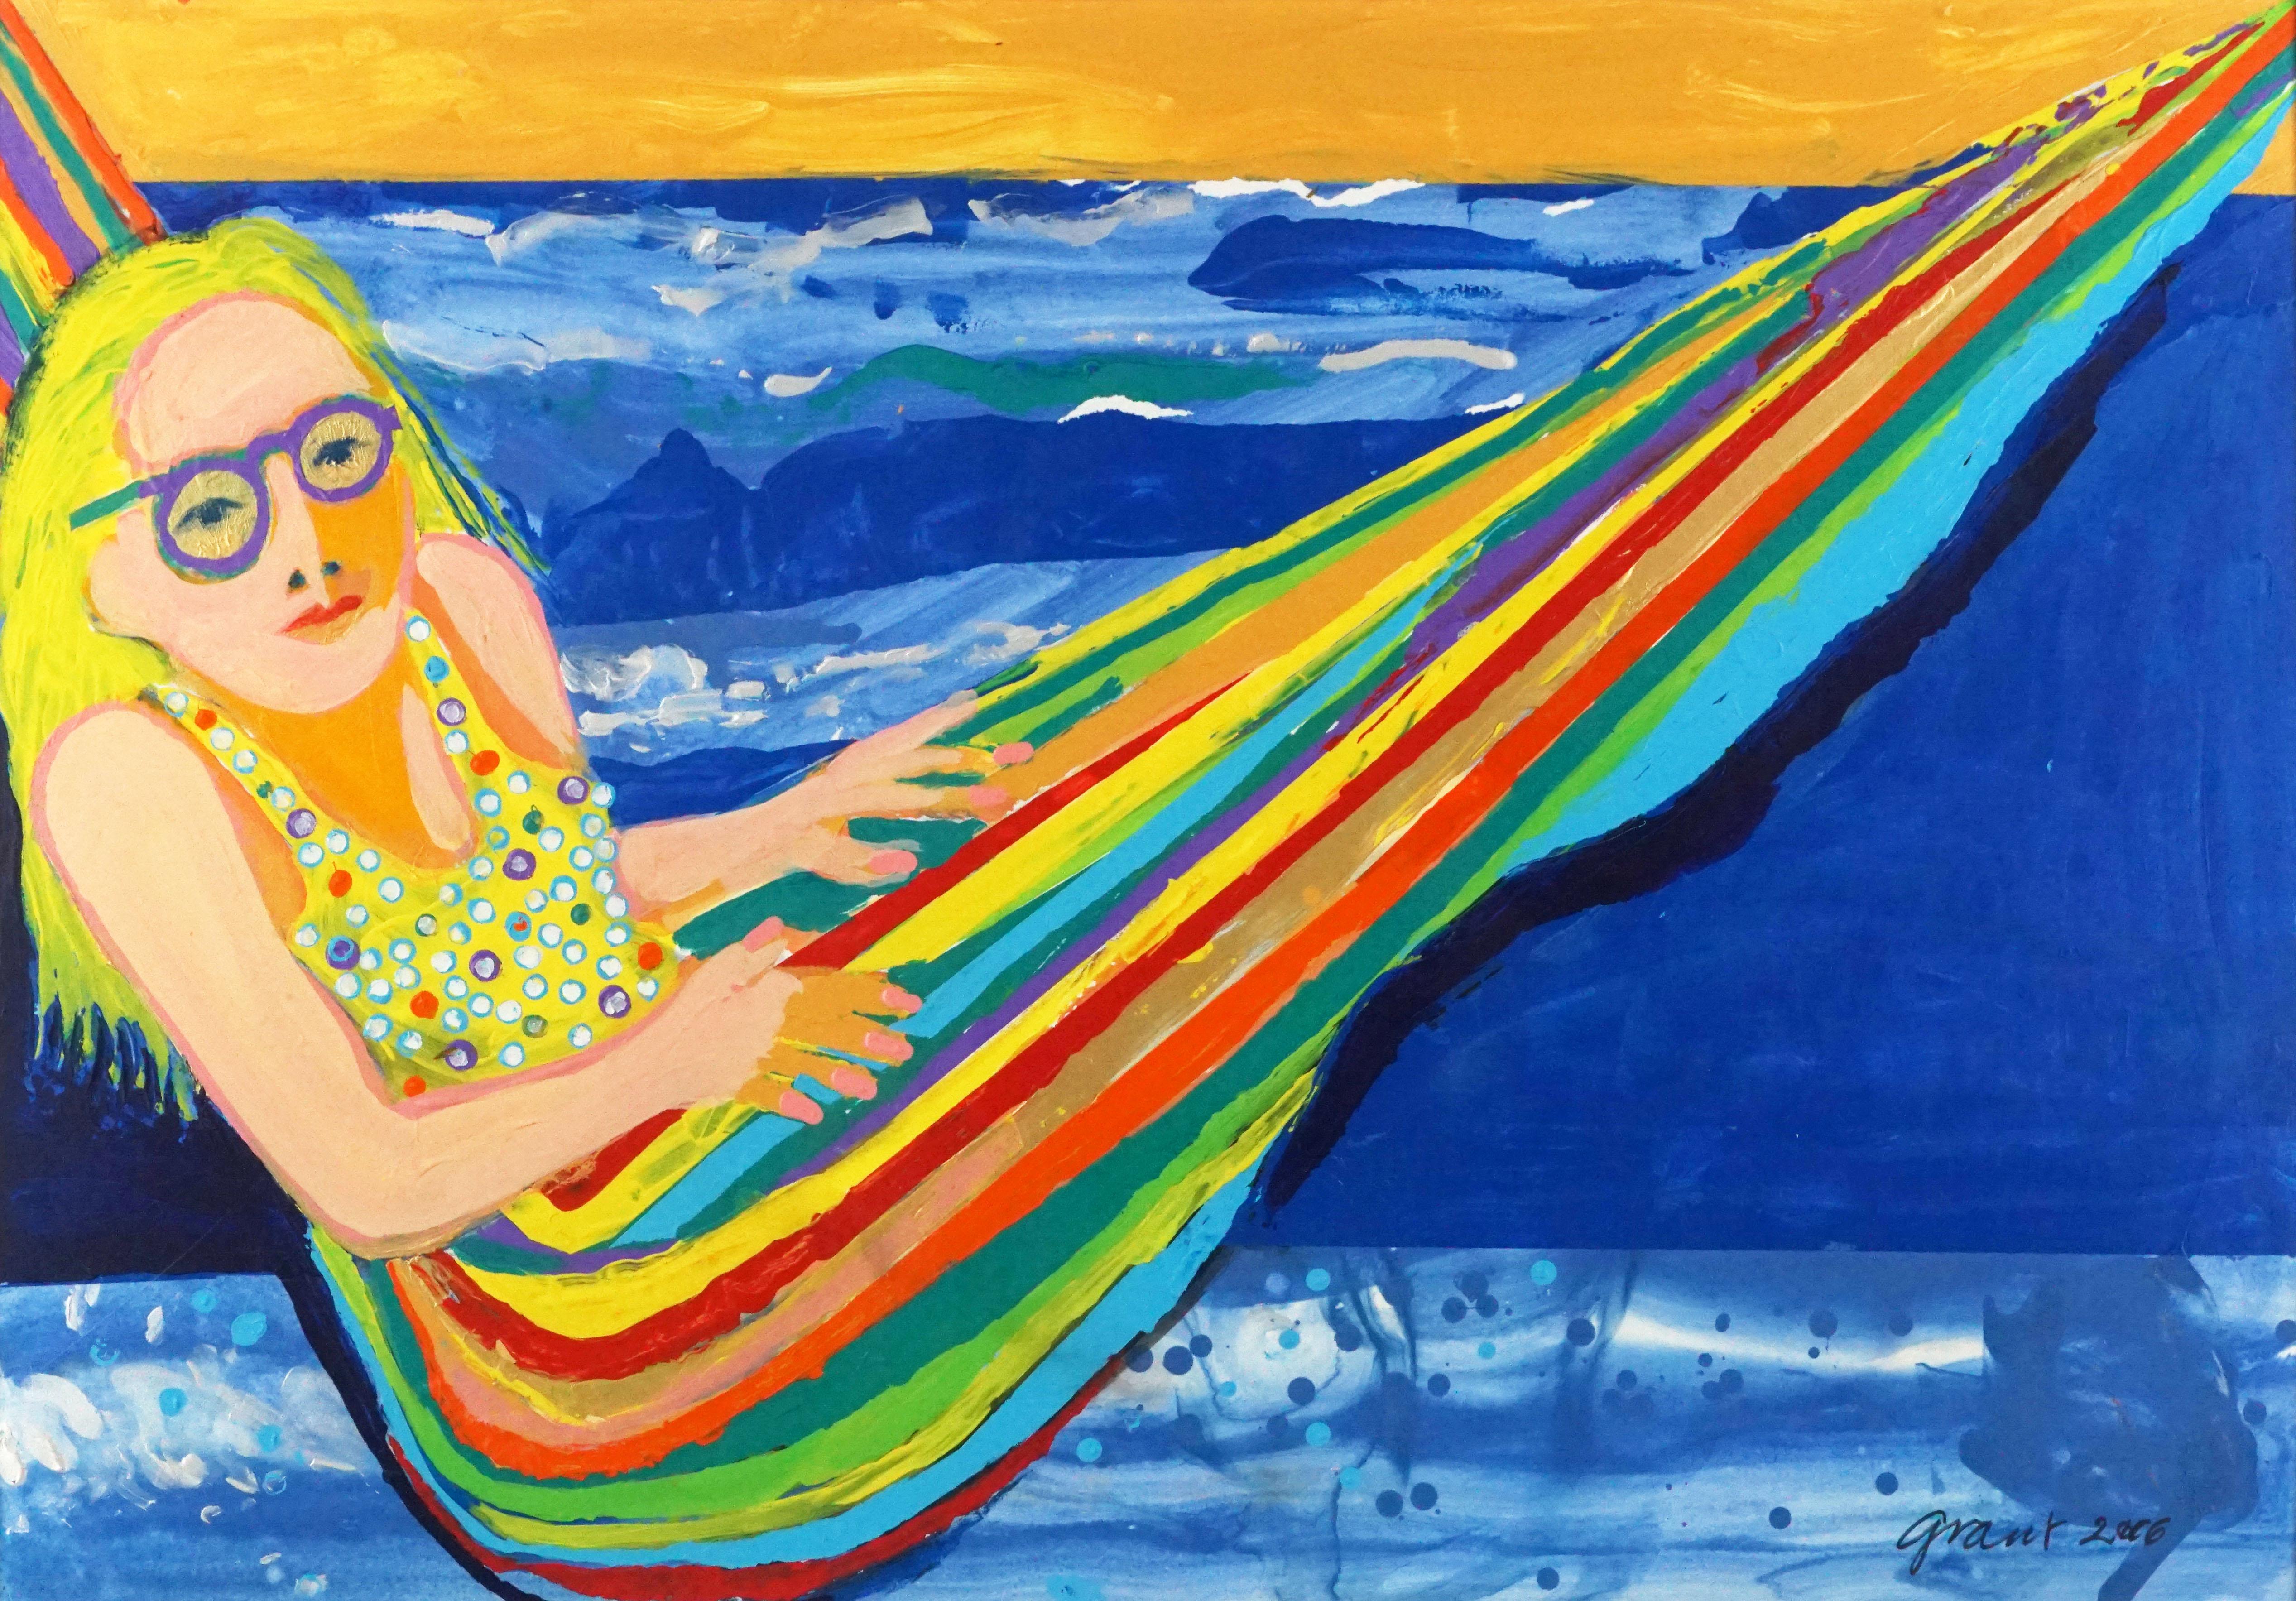 Simple Summer Days, Figure in a Hammock Pop Art Abstract  - Painting by Marc Foster Grant